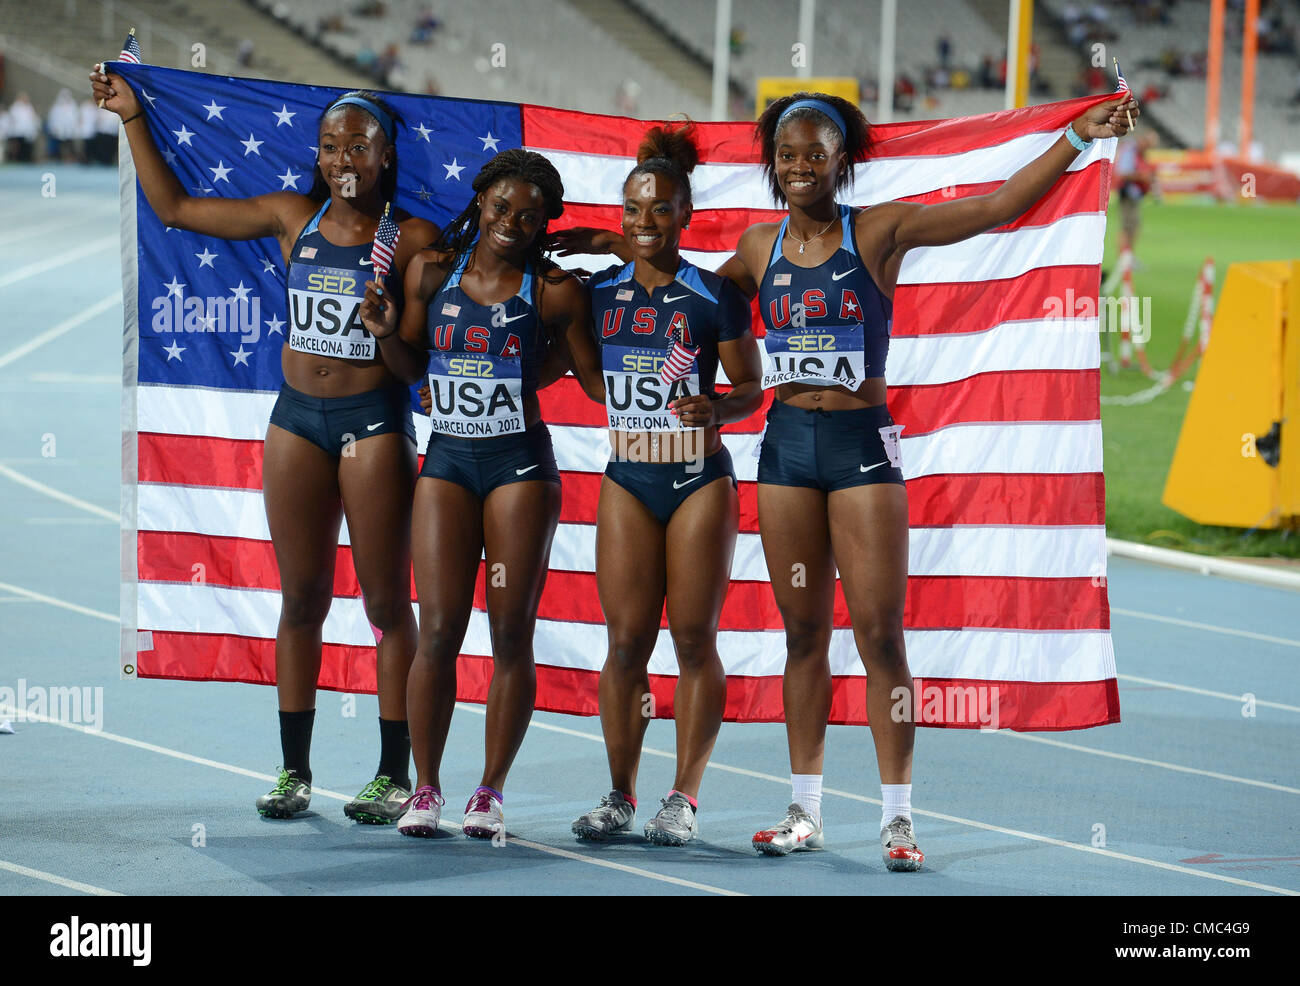 BARCELONA, Spain: Saturday 14 July 2012, The 4x100m relay team from the USA (Derezea Bryant, Morgan Snow, Jennifer Madu and Shayla Sanders) during day 5 of the IAAF World Junior Championships at the Estadi Olimpic de Montjuic. Photo by Roger Sedres/ImageSA Stock Photo